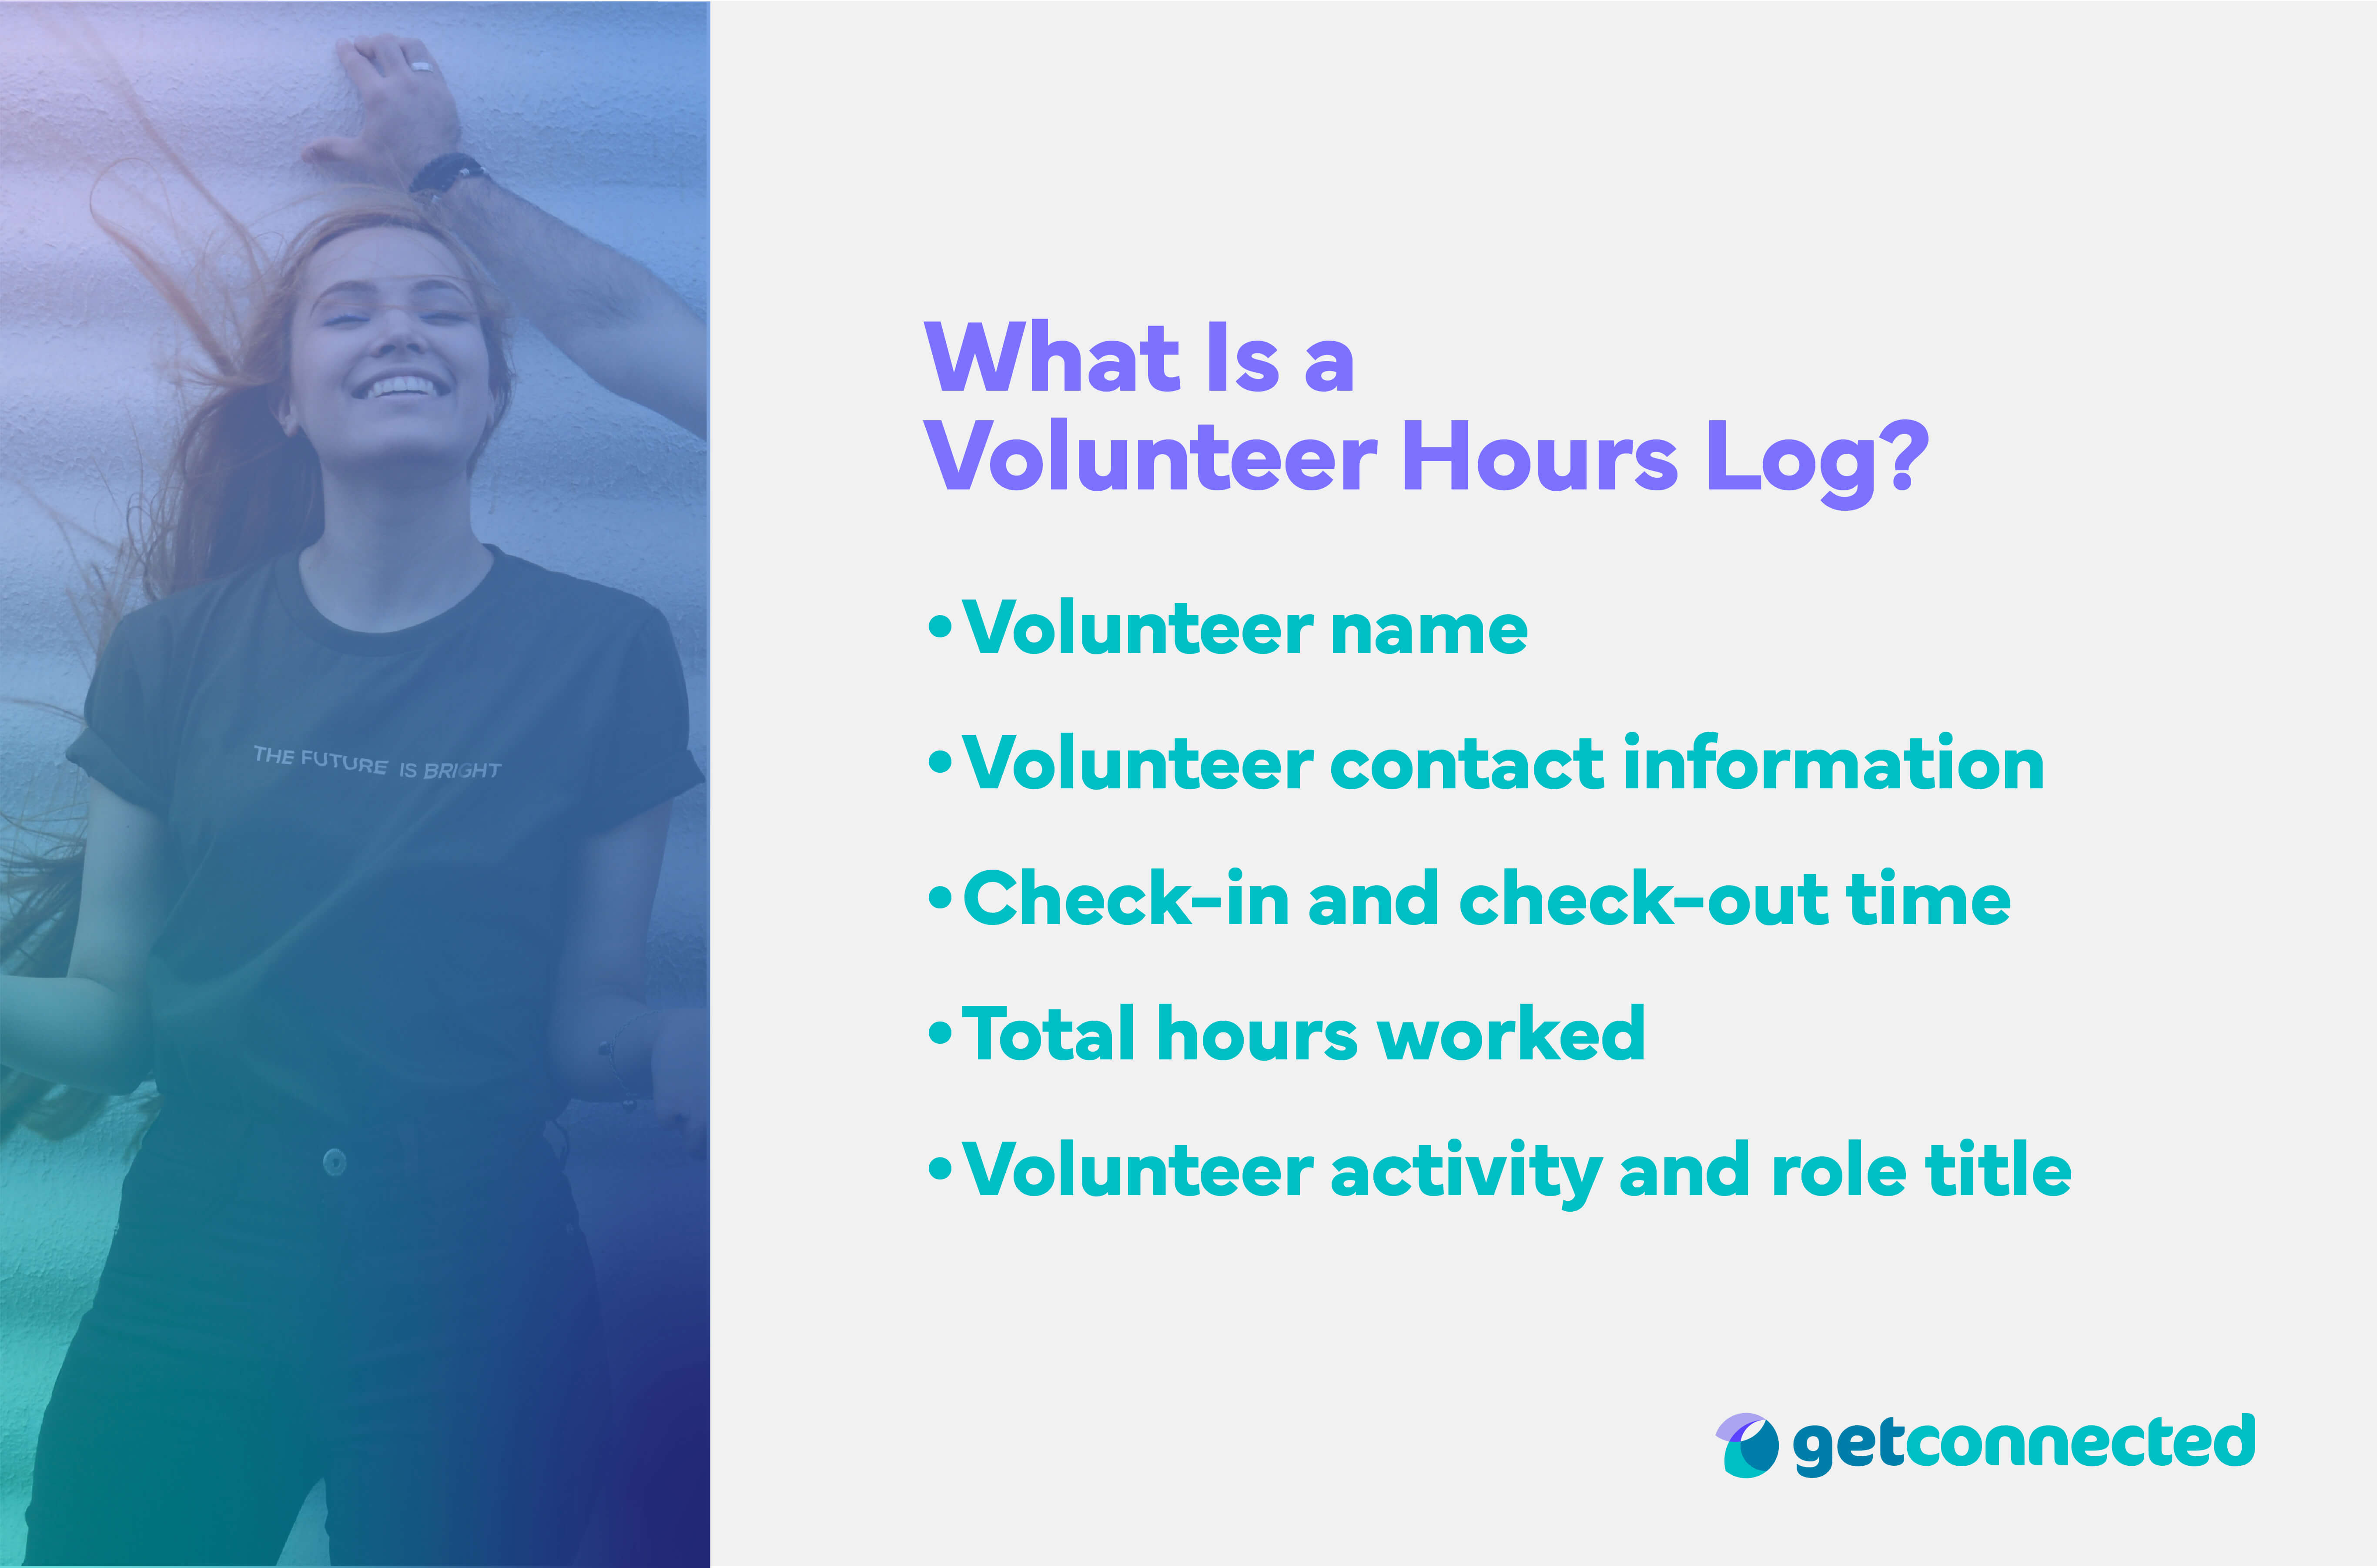 Volunteer hours log components including name, contact info, check in time, total hours worked, and role title